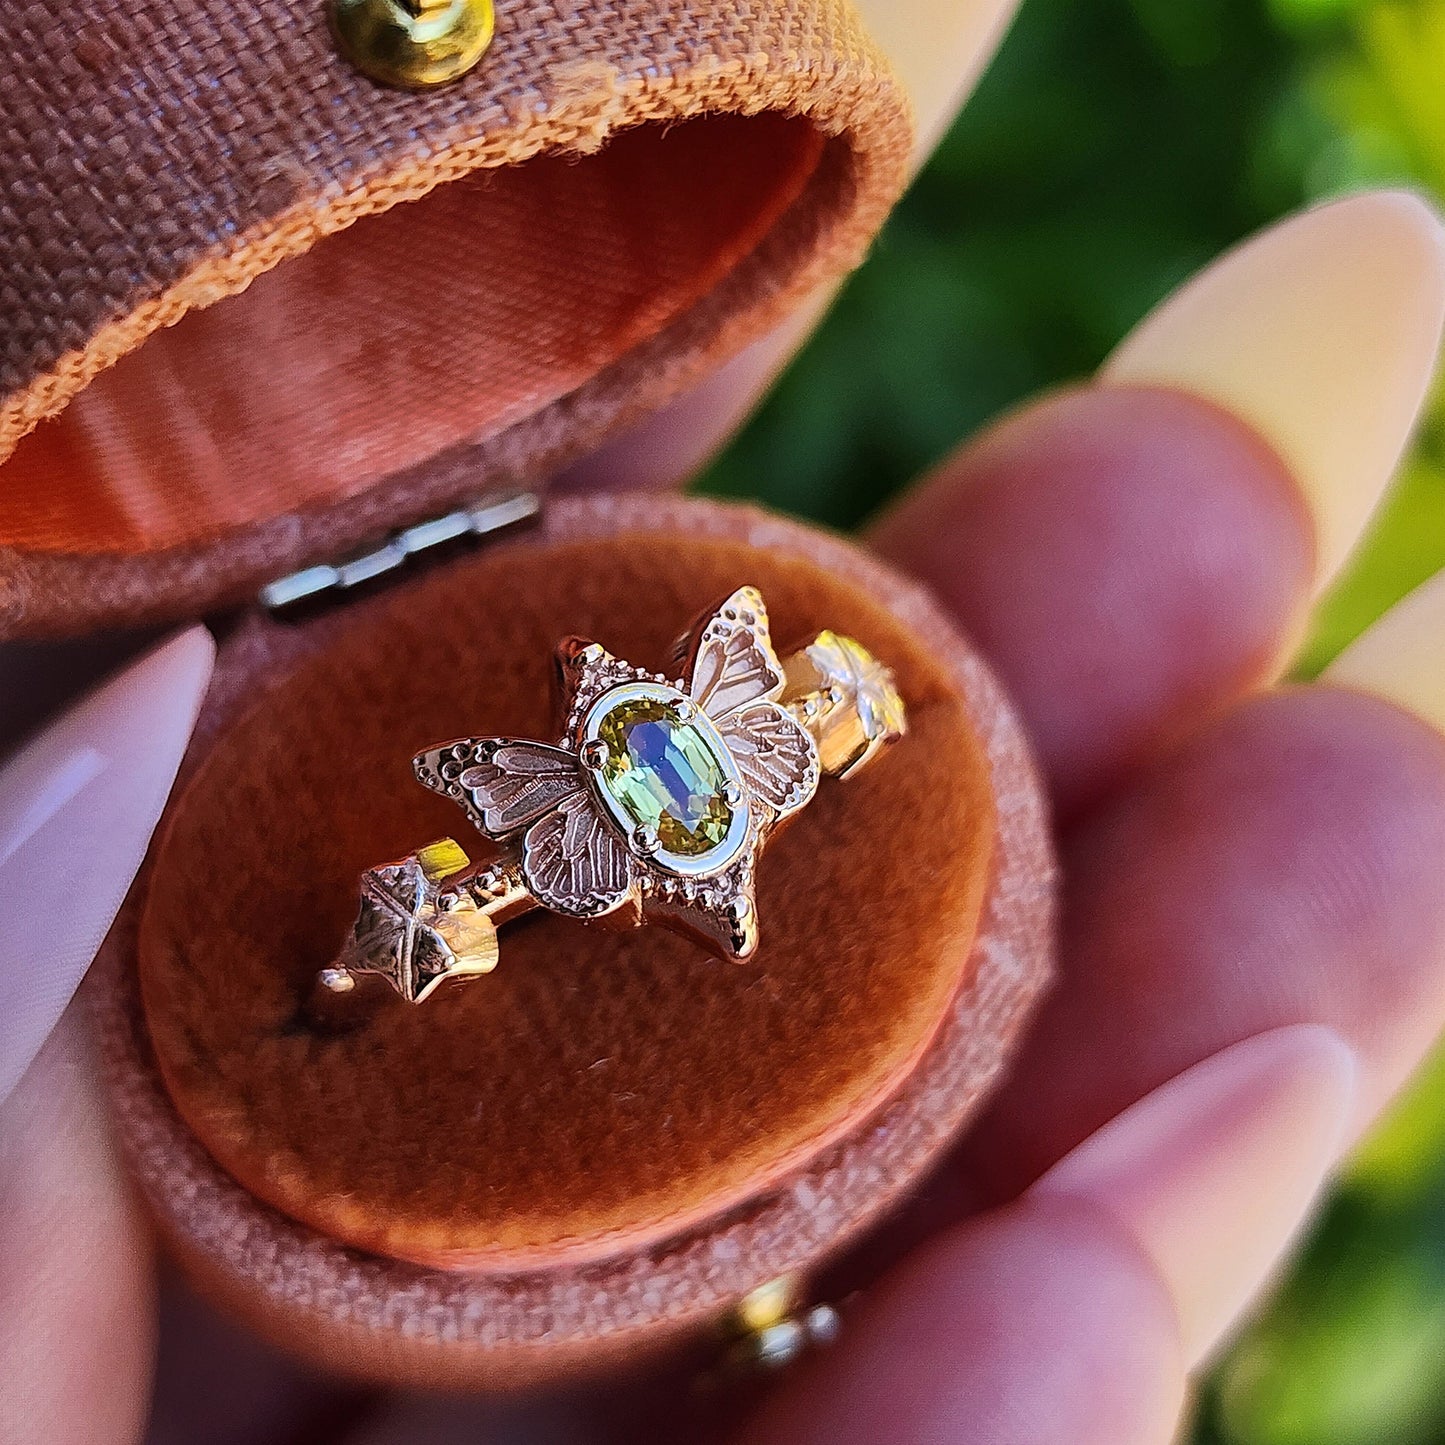 Butterfly Faerie Ring with Oval Sapphire Fairy Fantasy Engagement with Ivy Leaf - Pick your Gemstone Fairytale 14k Gold